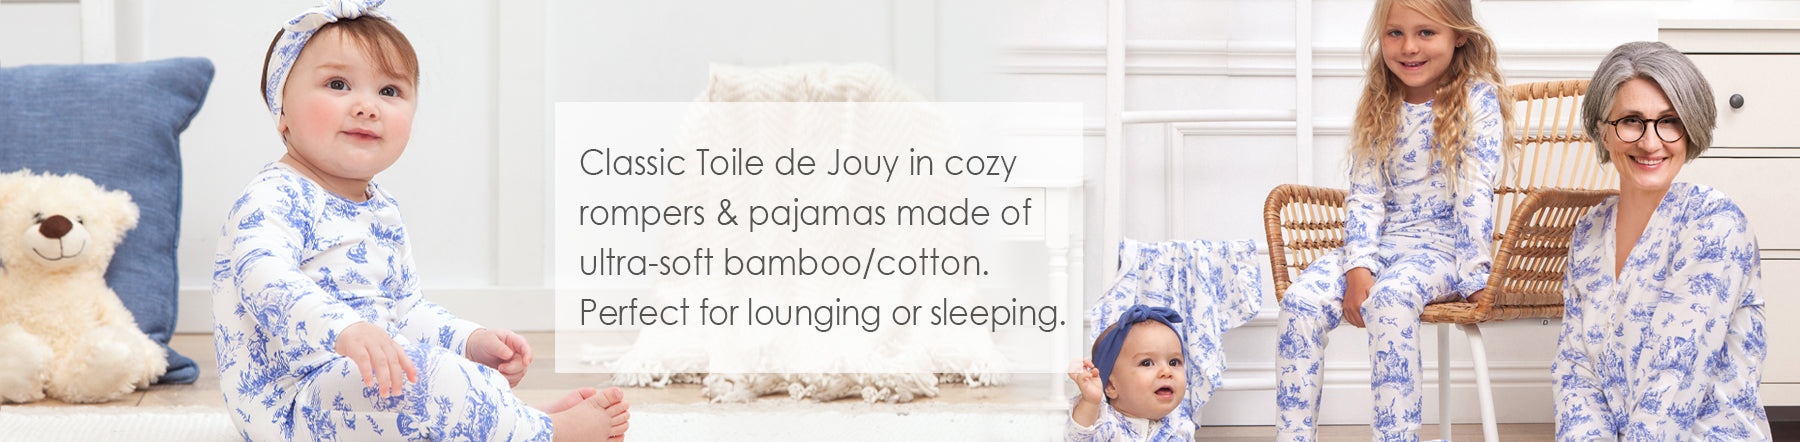 toile de jouy bamboo rompers and pajamas